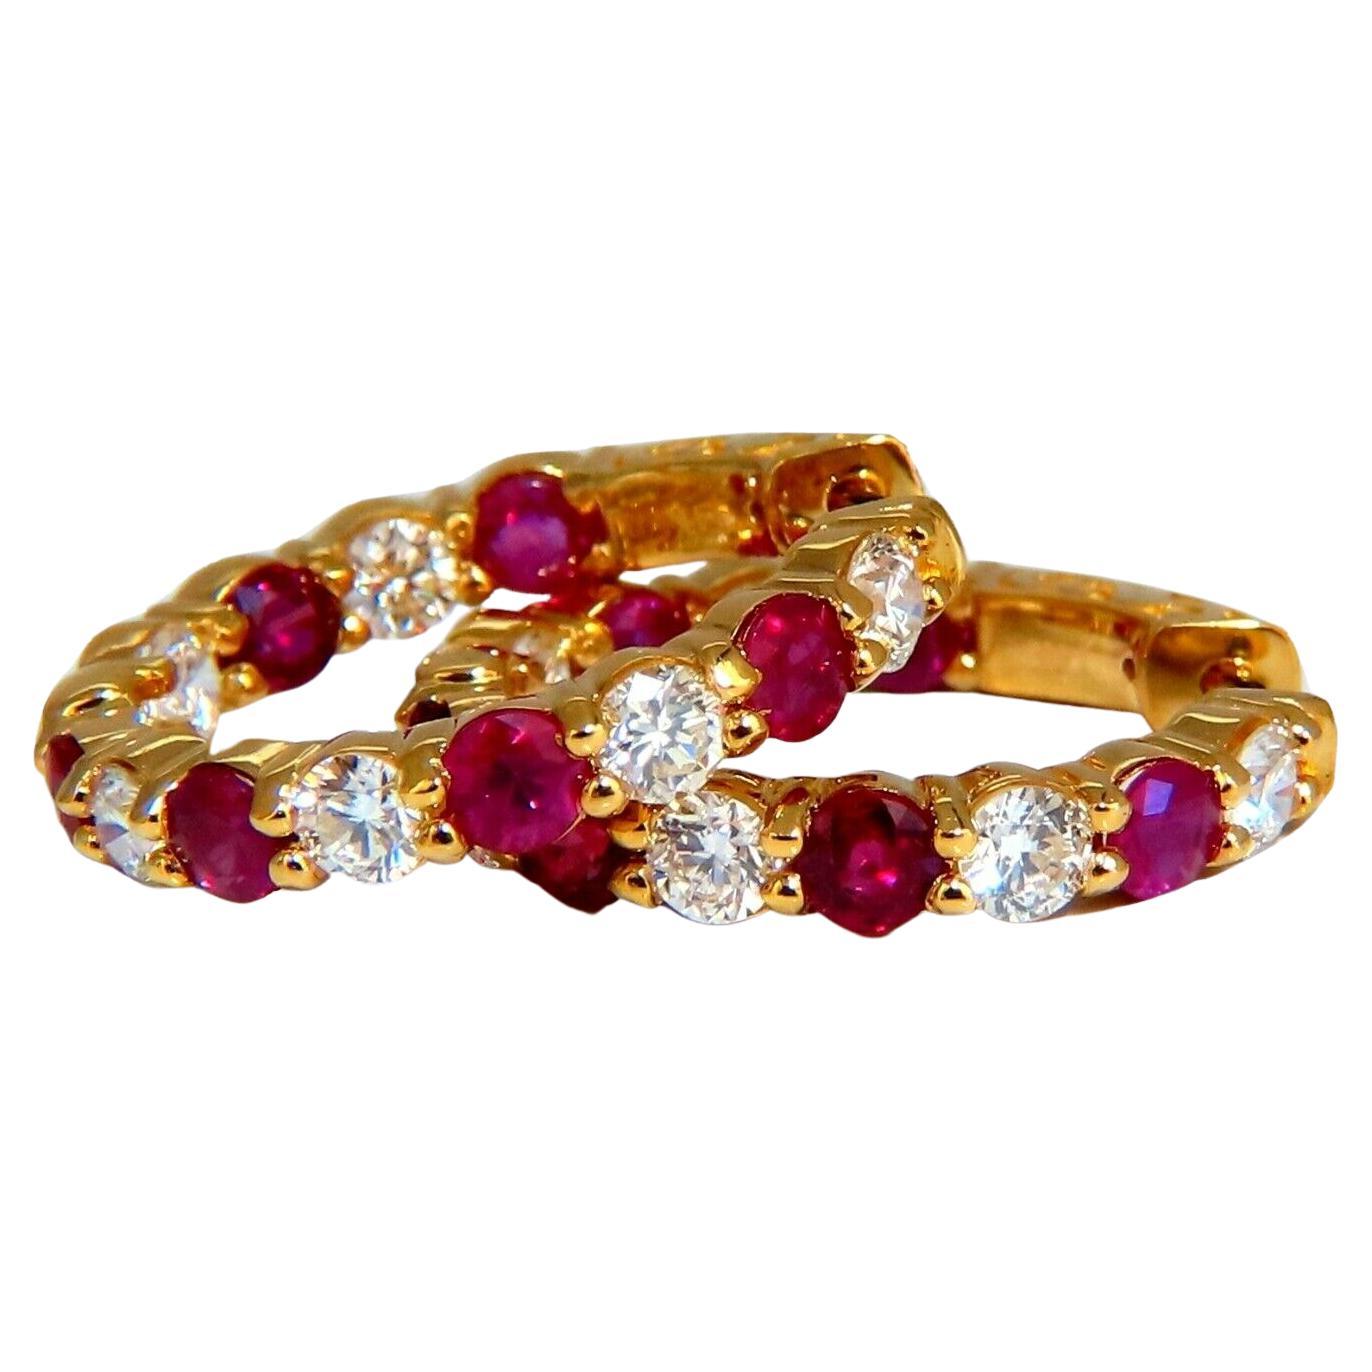 4.14ct Natural Ruby Diamonds Hoop Earrings 14kt Yellow Gold Inside Out For Sale